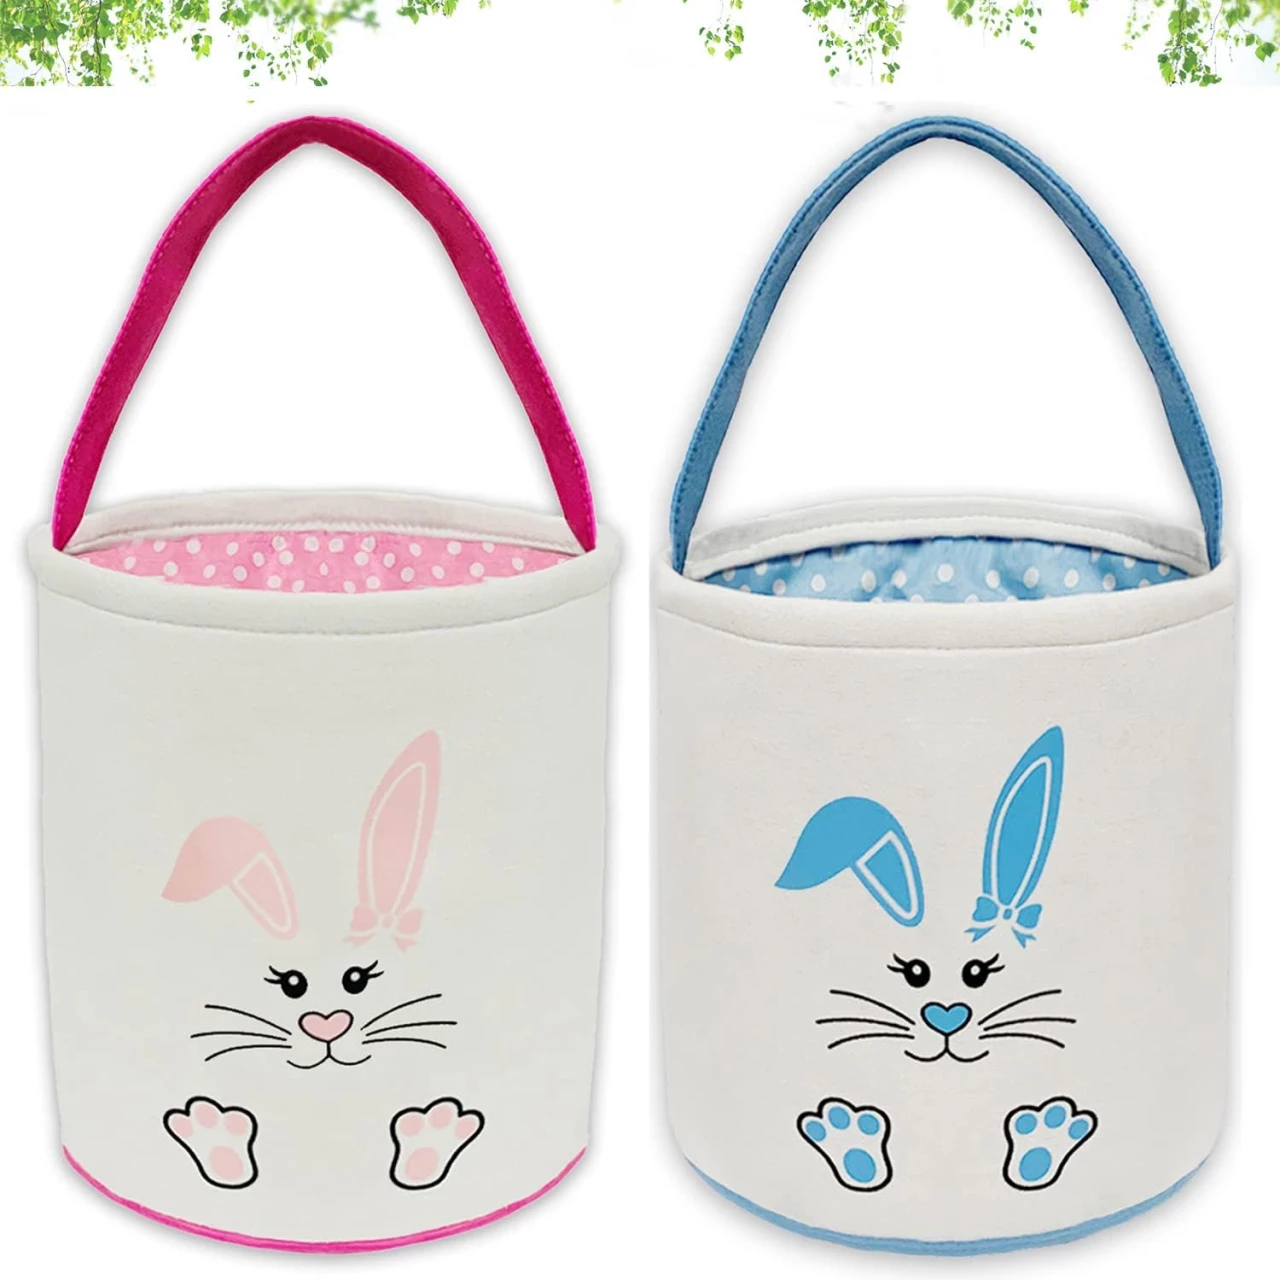 XMxoTxo 2 Pack Easter Bunny Basket Bags for Kids Empty,Collapsible Canvas Easter Bucket for Candy Gifts at Party, Rabbit Ears Design Jute Cloth Tote Bags for Eggs Hunting